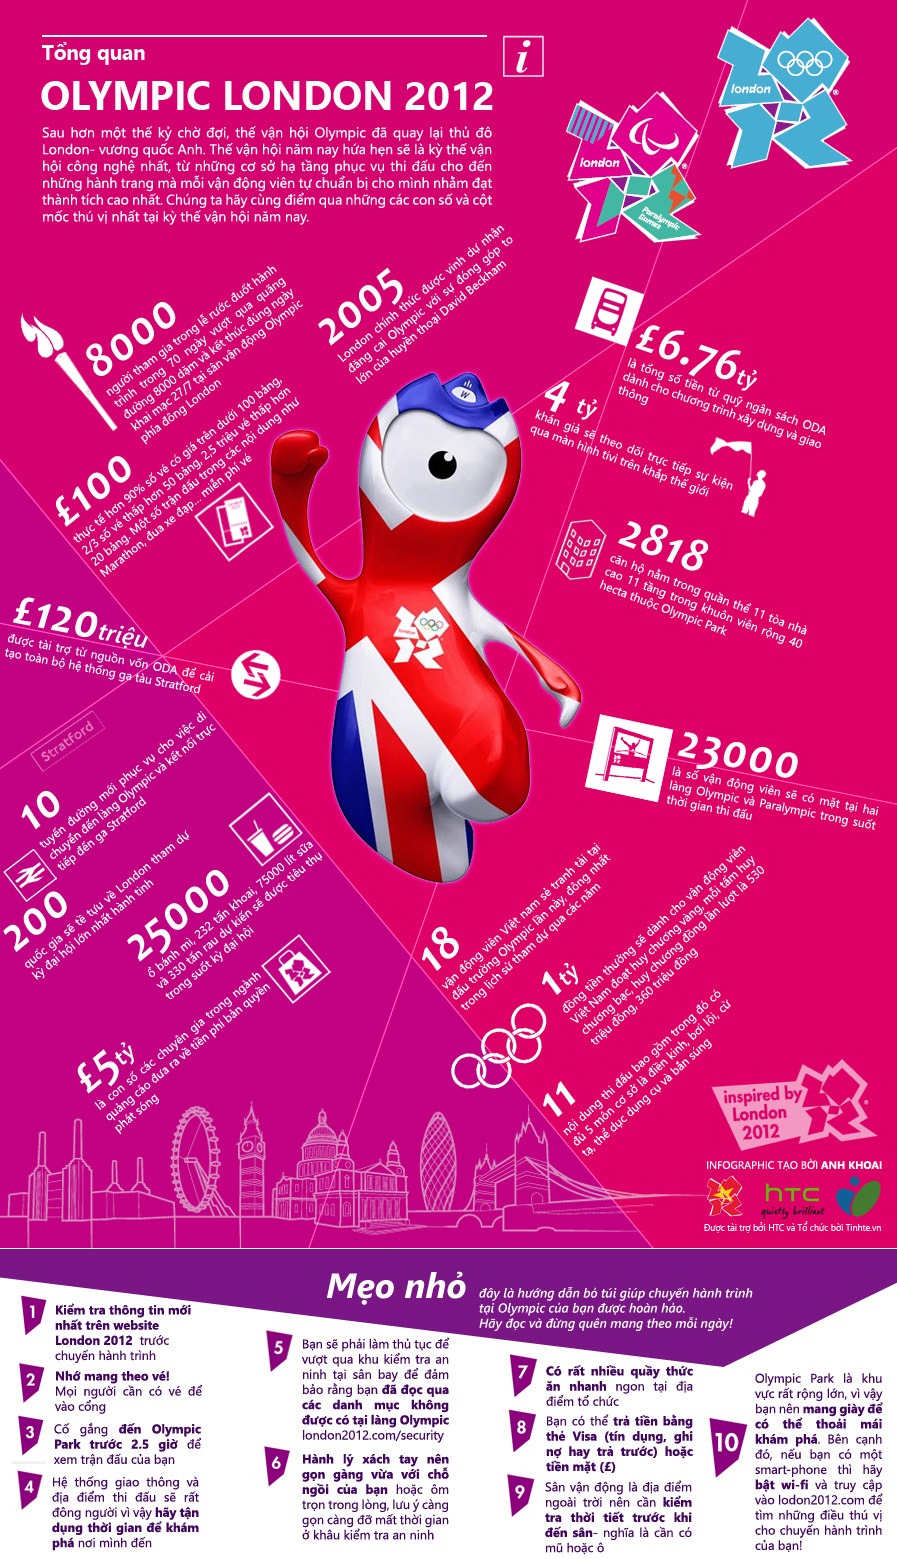 infographic London 2012 by ANH KHOAI.jpg